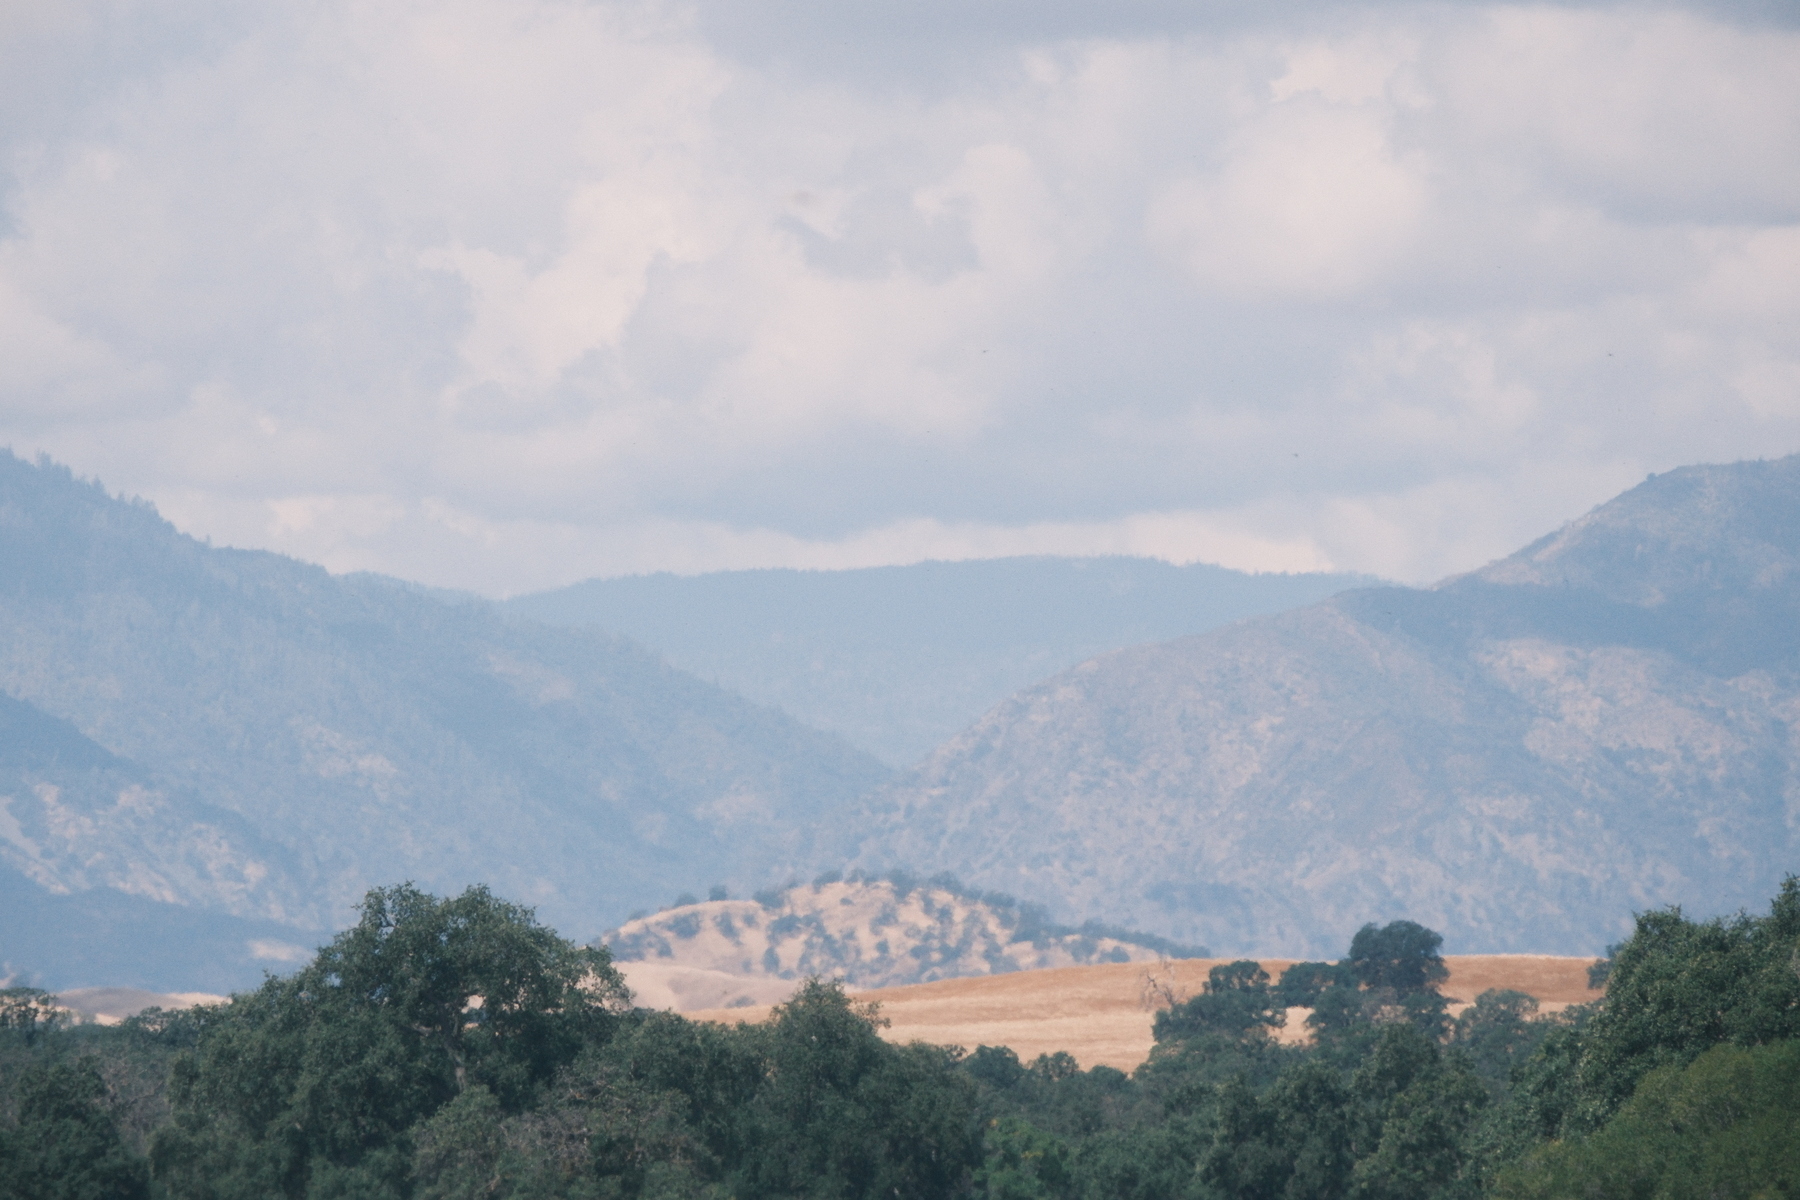 A long view to the Northern California Coast range. It's a hazy and overcast day. Oaks and rolling golden hills are in front of some rugged mountains.